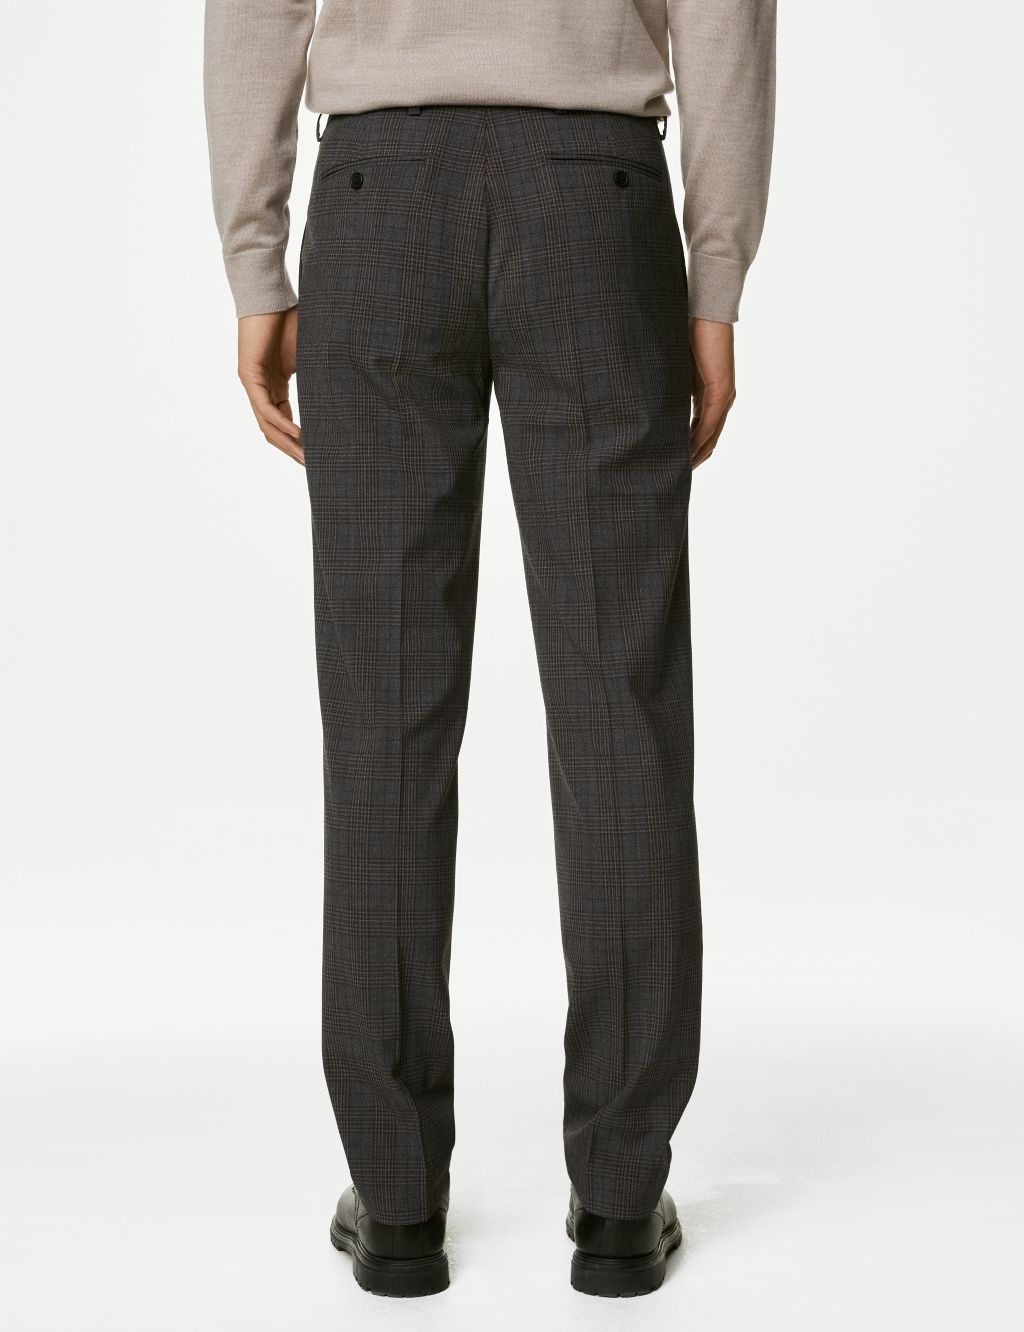 Textured Checked Stretch Trousers image 5